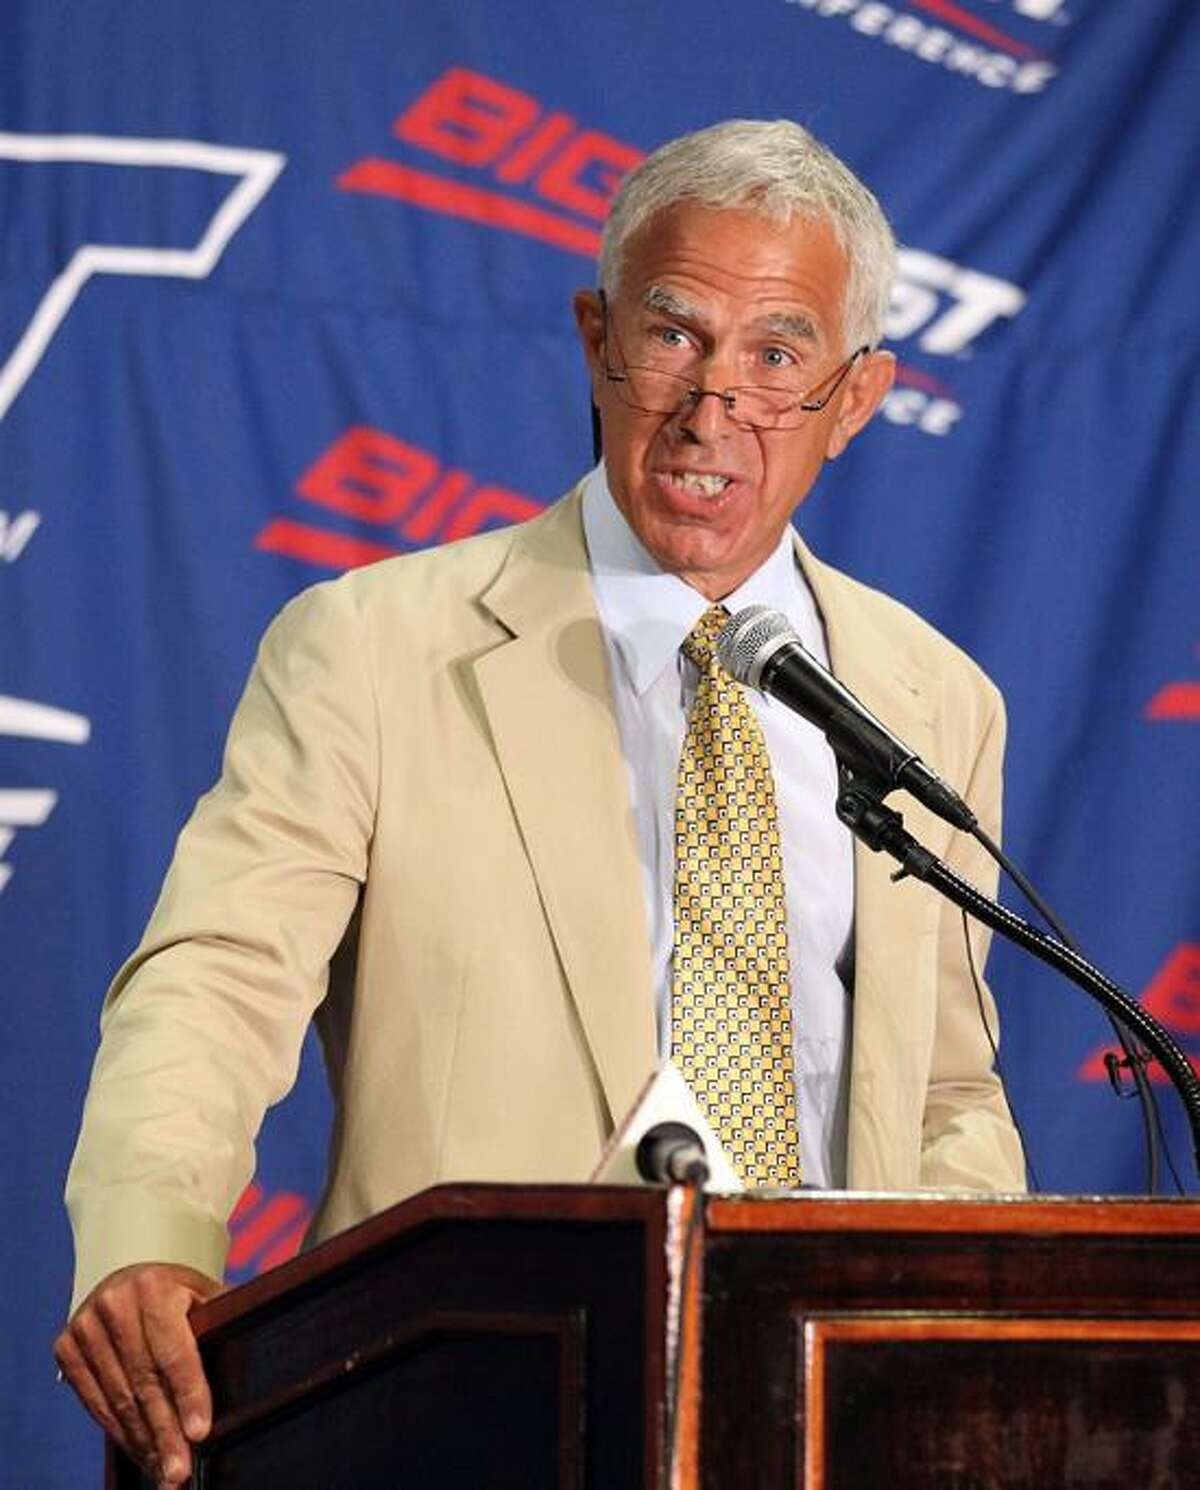 In a 2011 file photo, UConn football coach Paul Pasqualoni speaks to the media during the Big East football media day in Newport, R.I. Associated Press